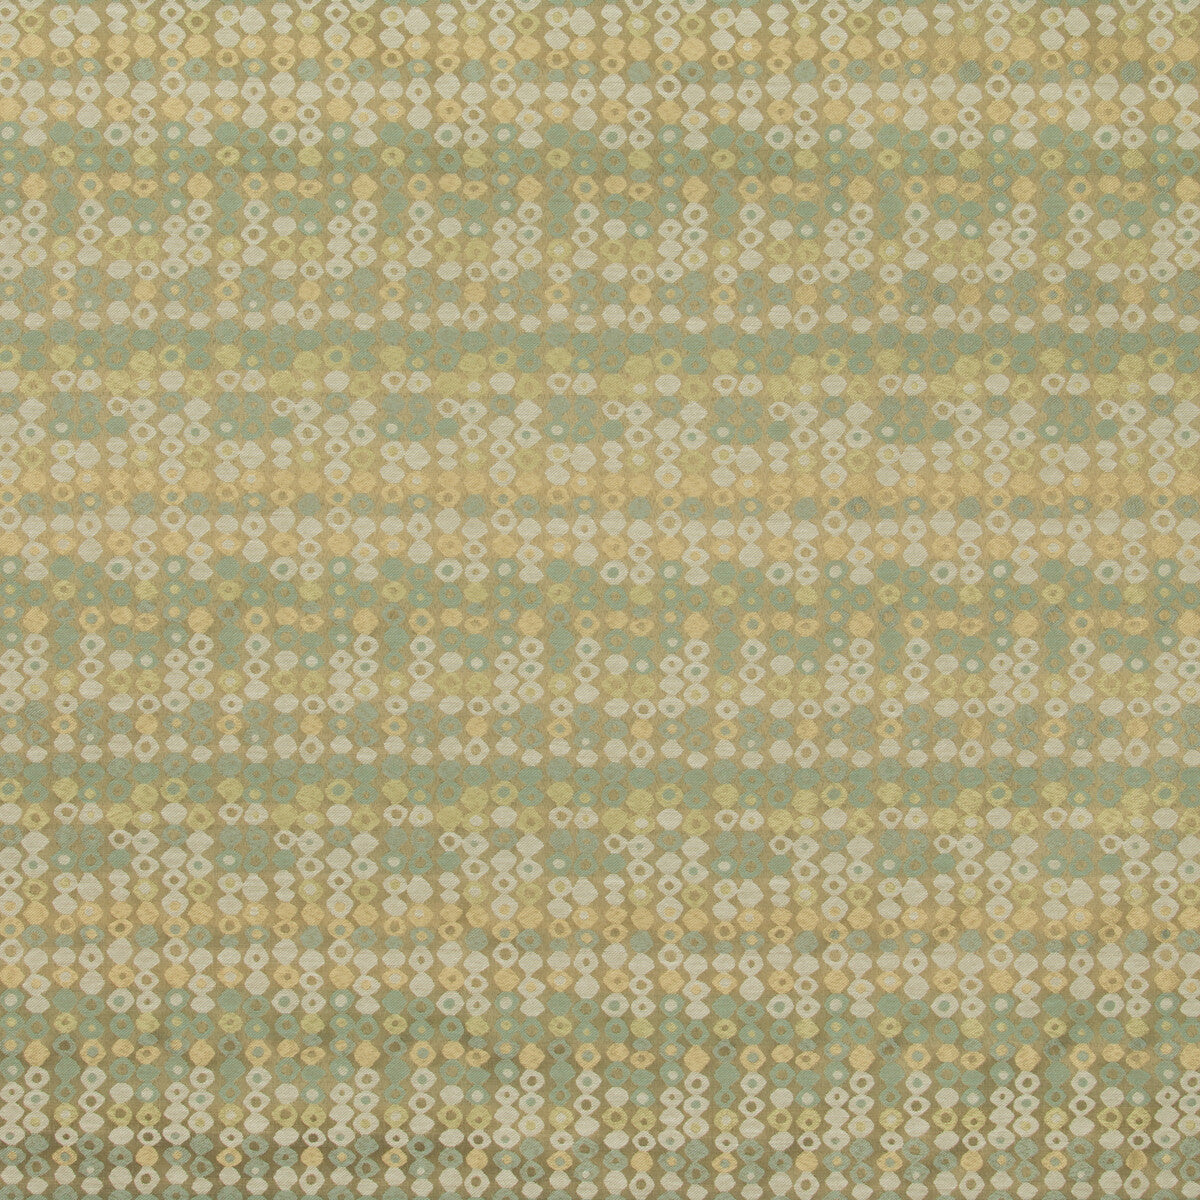 Missing Link fabric in tidal color - pattern 32927.316.0 - by Kravet Contract in the Gis Crypton collection